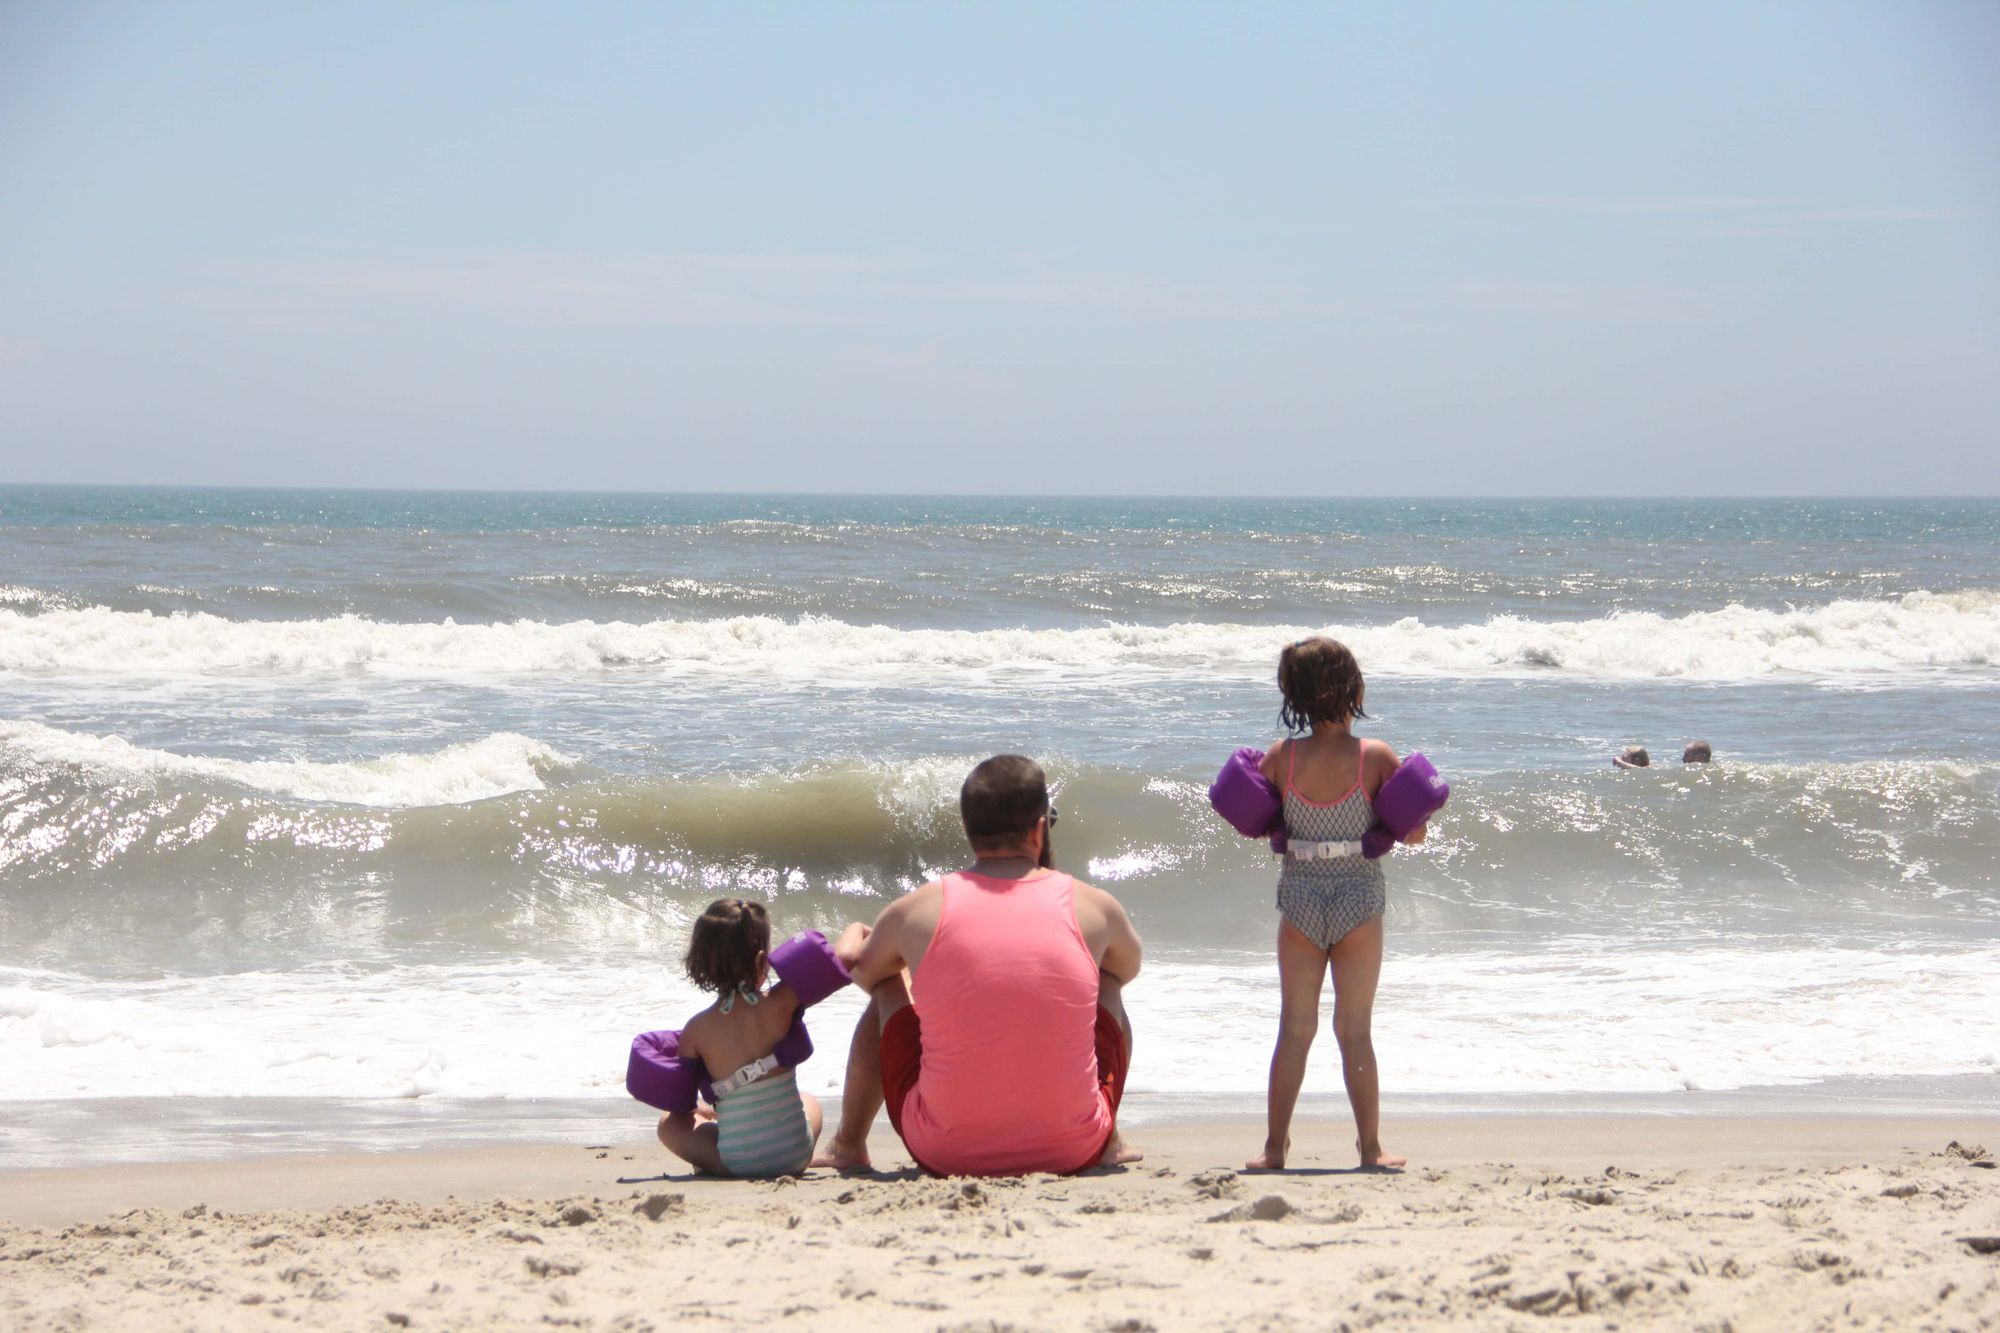 A dad and his daughters watching the Atlantic waves crashing on the Assateague beach.